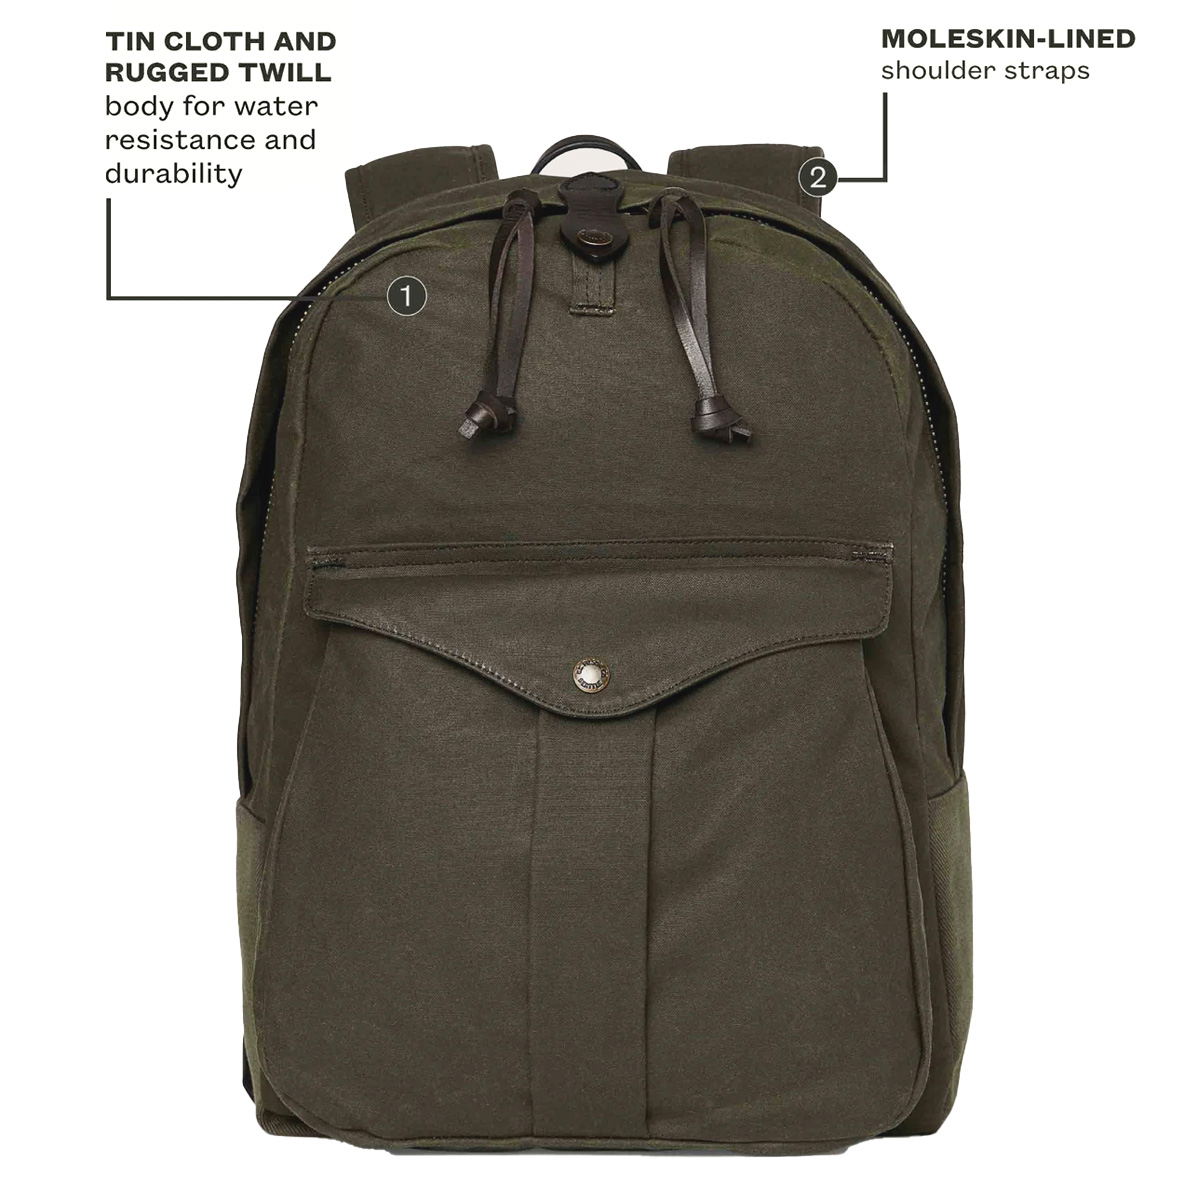 Filson Journeyman Backpack 20231638 Otter Green, made of Tin Cloth and Rugged Twill Canvas for water resistance and durability